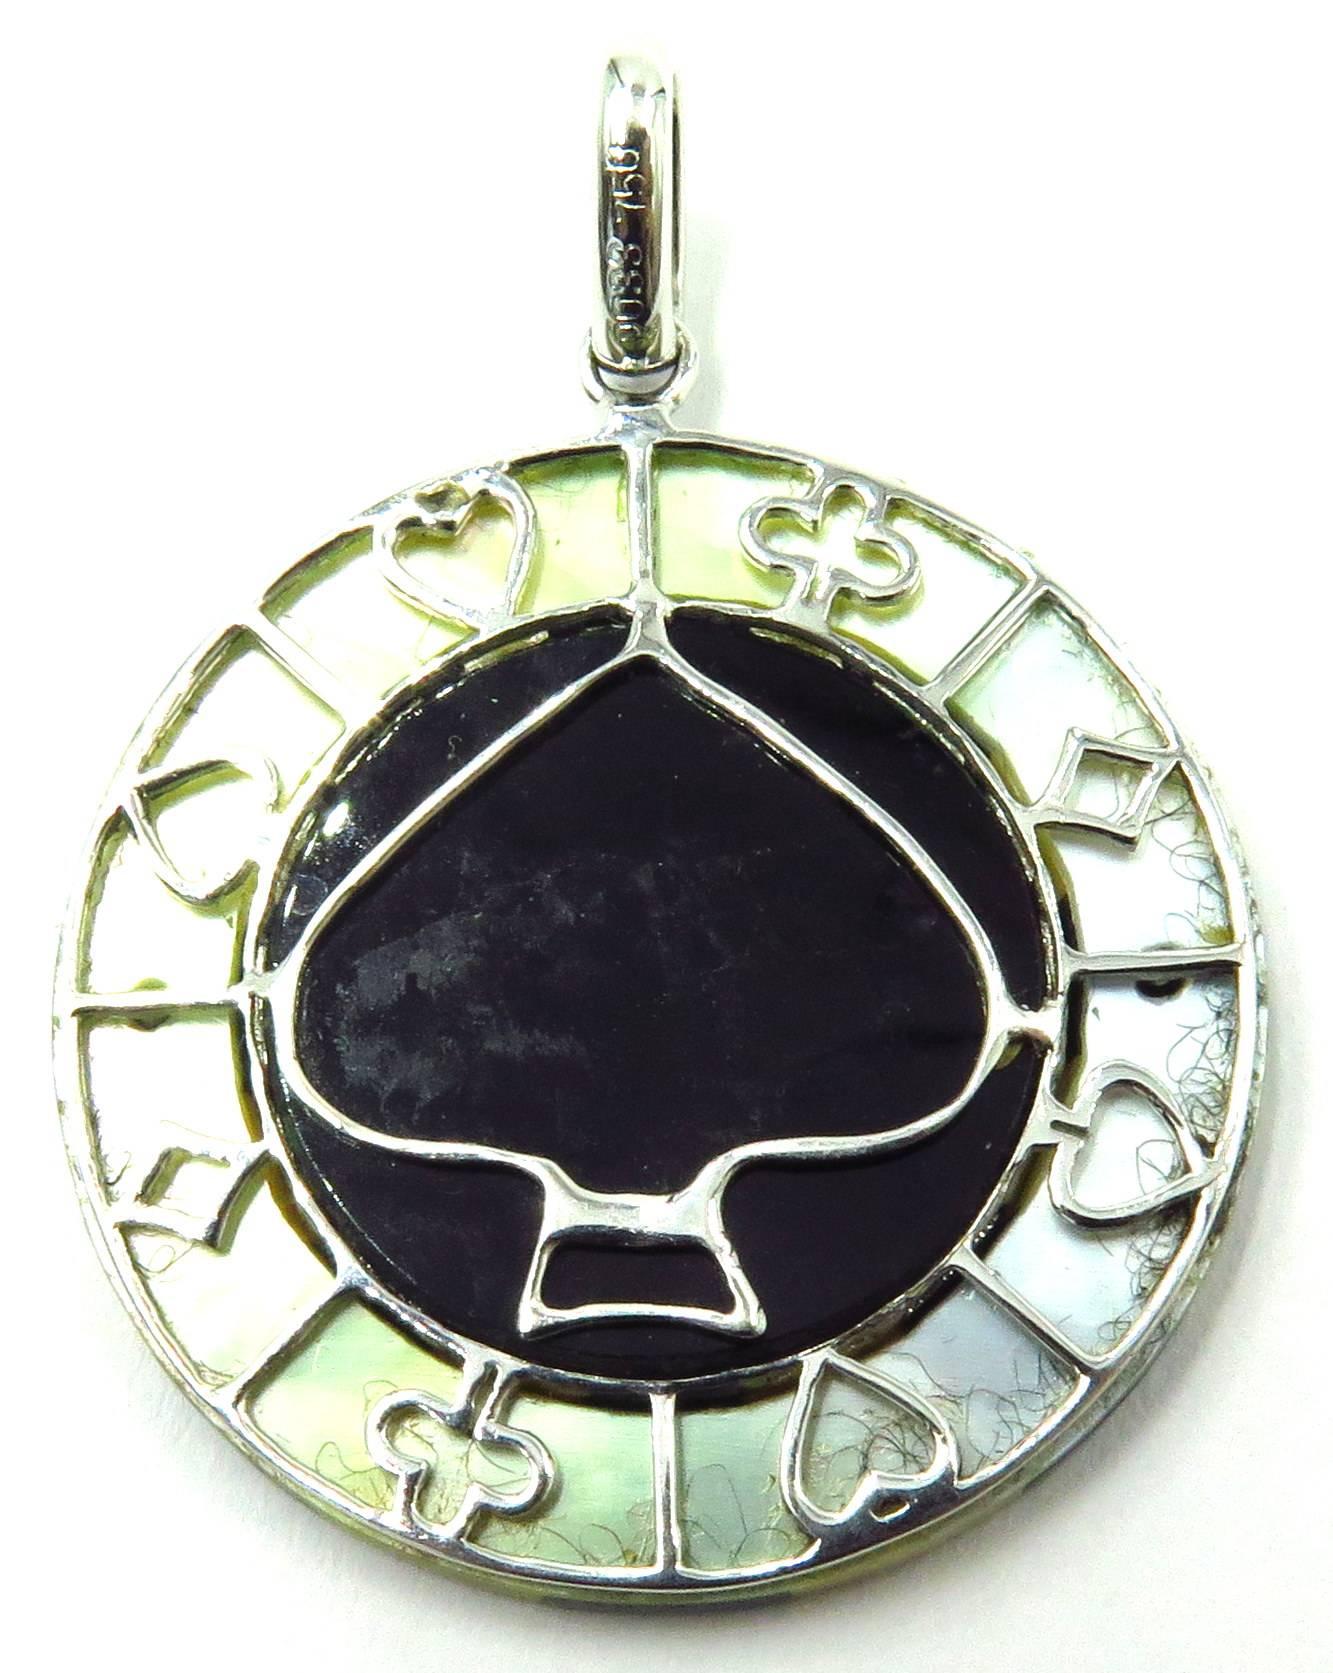 This lucky charm is just what you need whether your playing the tables, playing with love, or just playing in your day to day life! This beautifully made 18k white gold inlaid onyx, coral, mother of pearl and diamond casino looking poker chip is